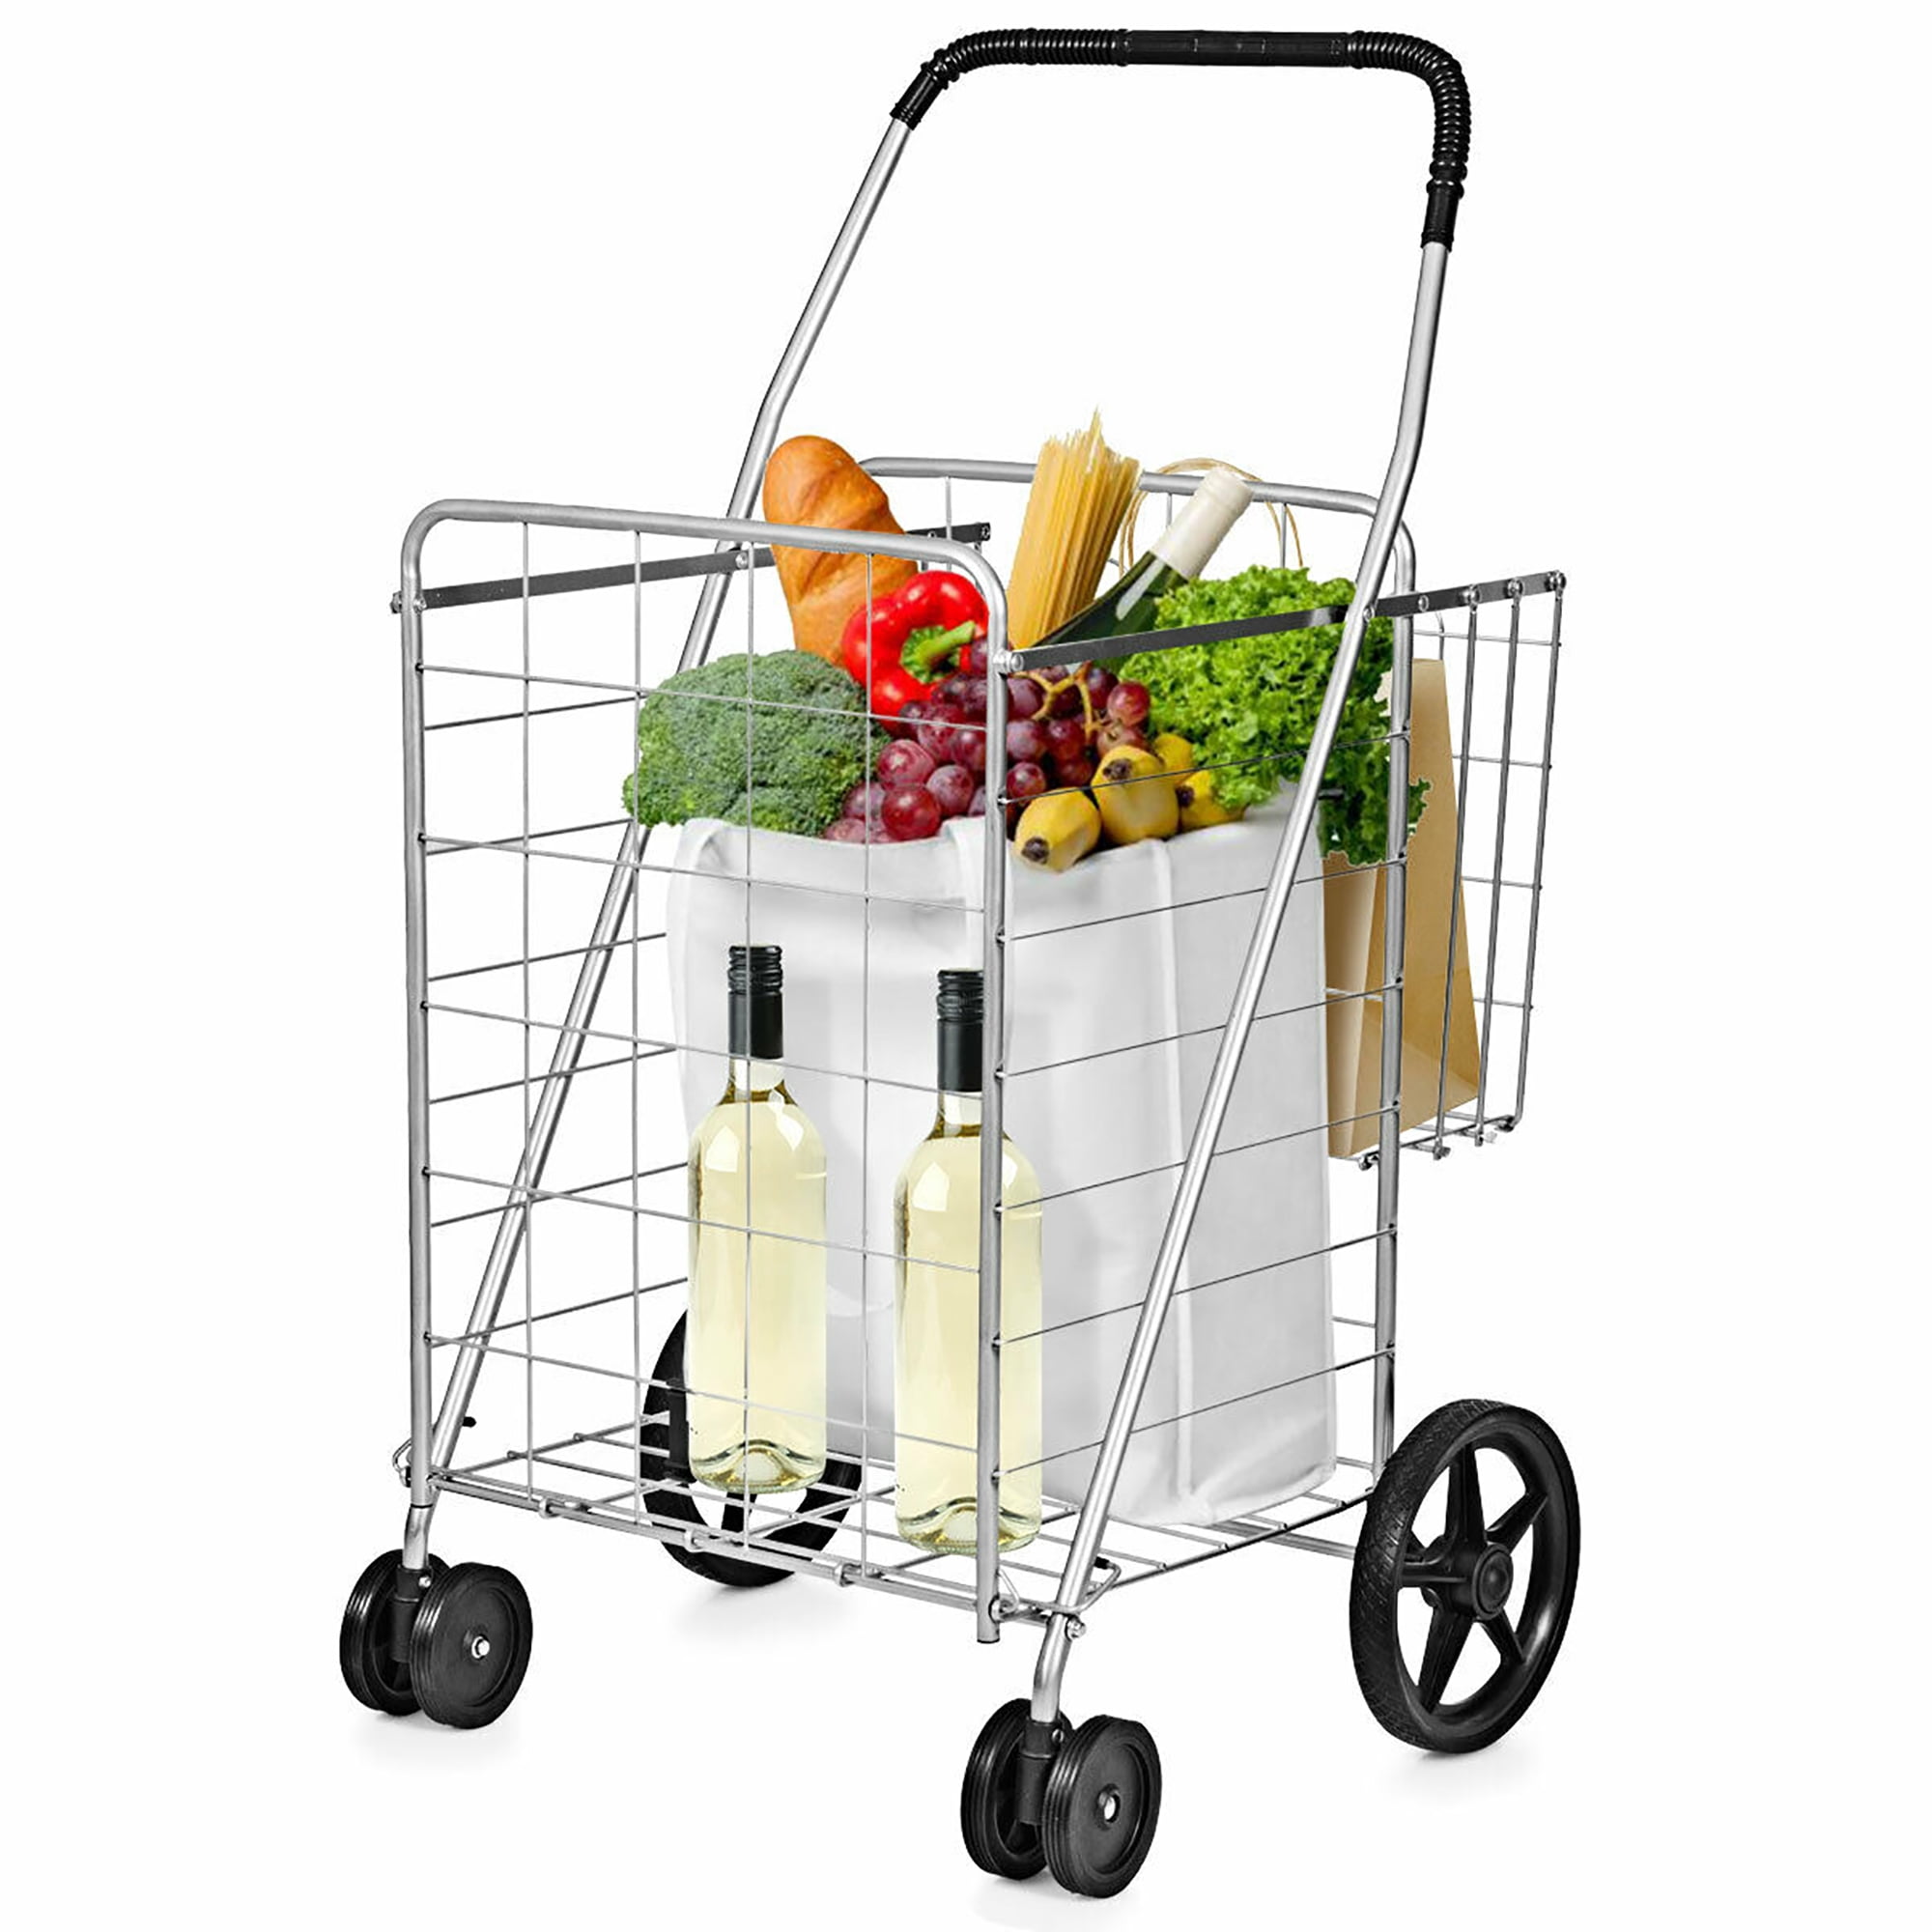 Folding Shopping Cart Jumbo Size Basket With Wheels for Laundry Travel Grocery for sale online